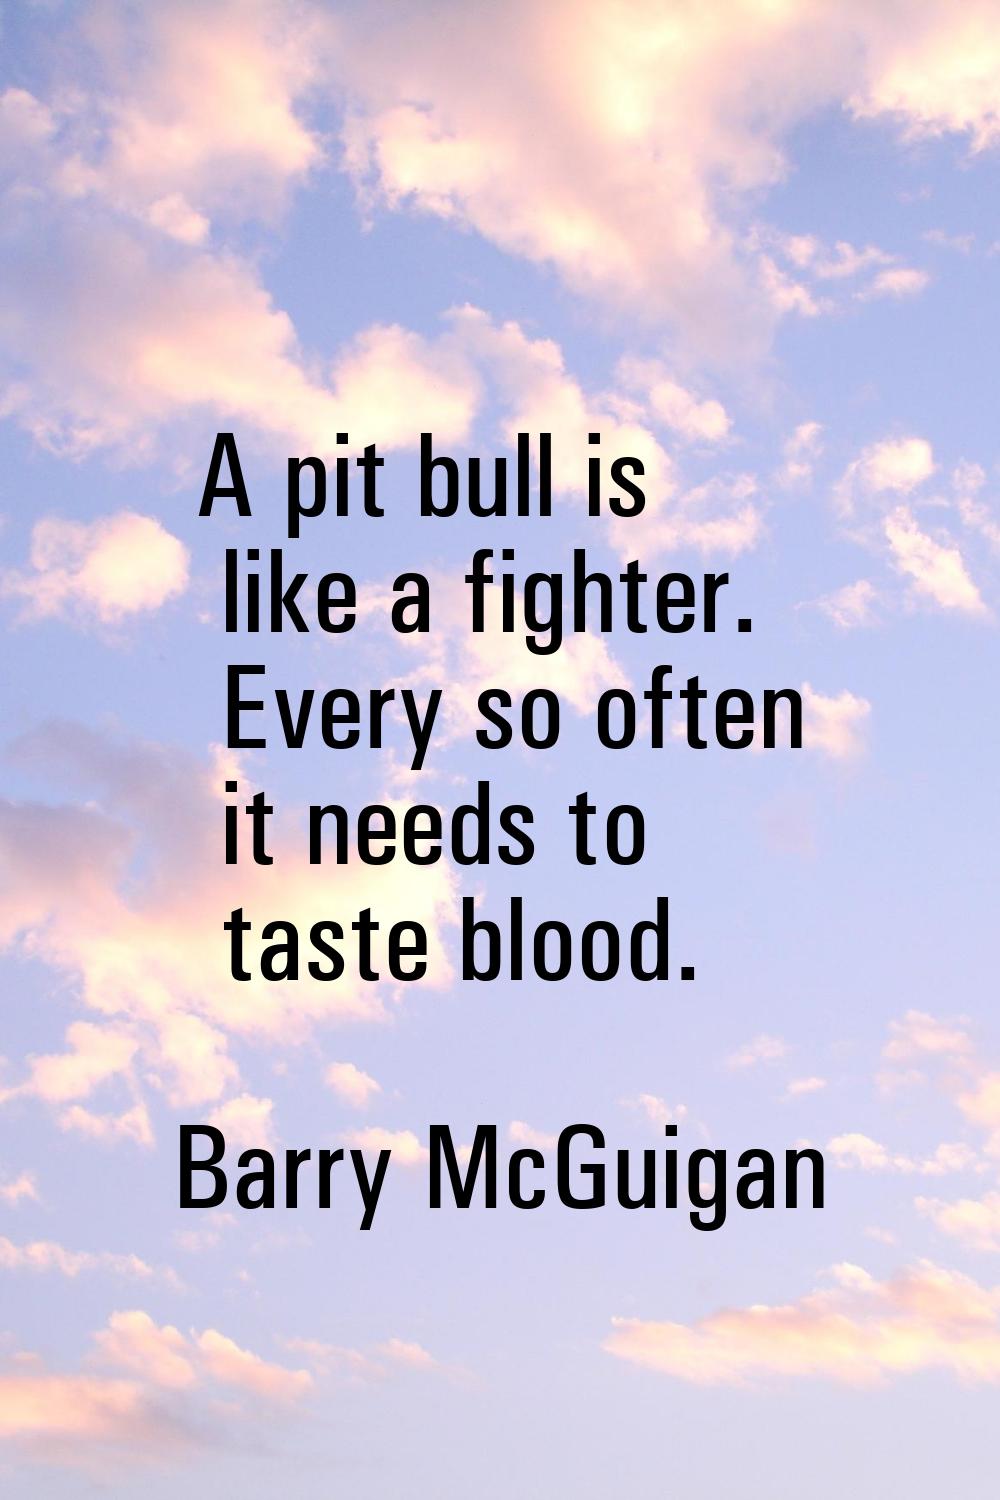 A pit bull is like a fighter. Every so often it needs to taste blood.